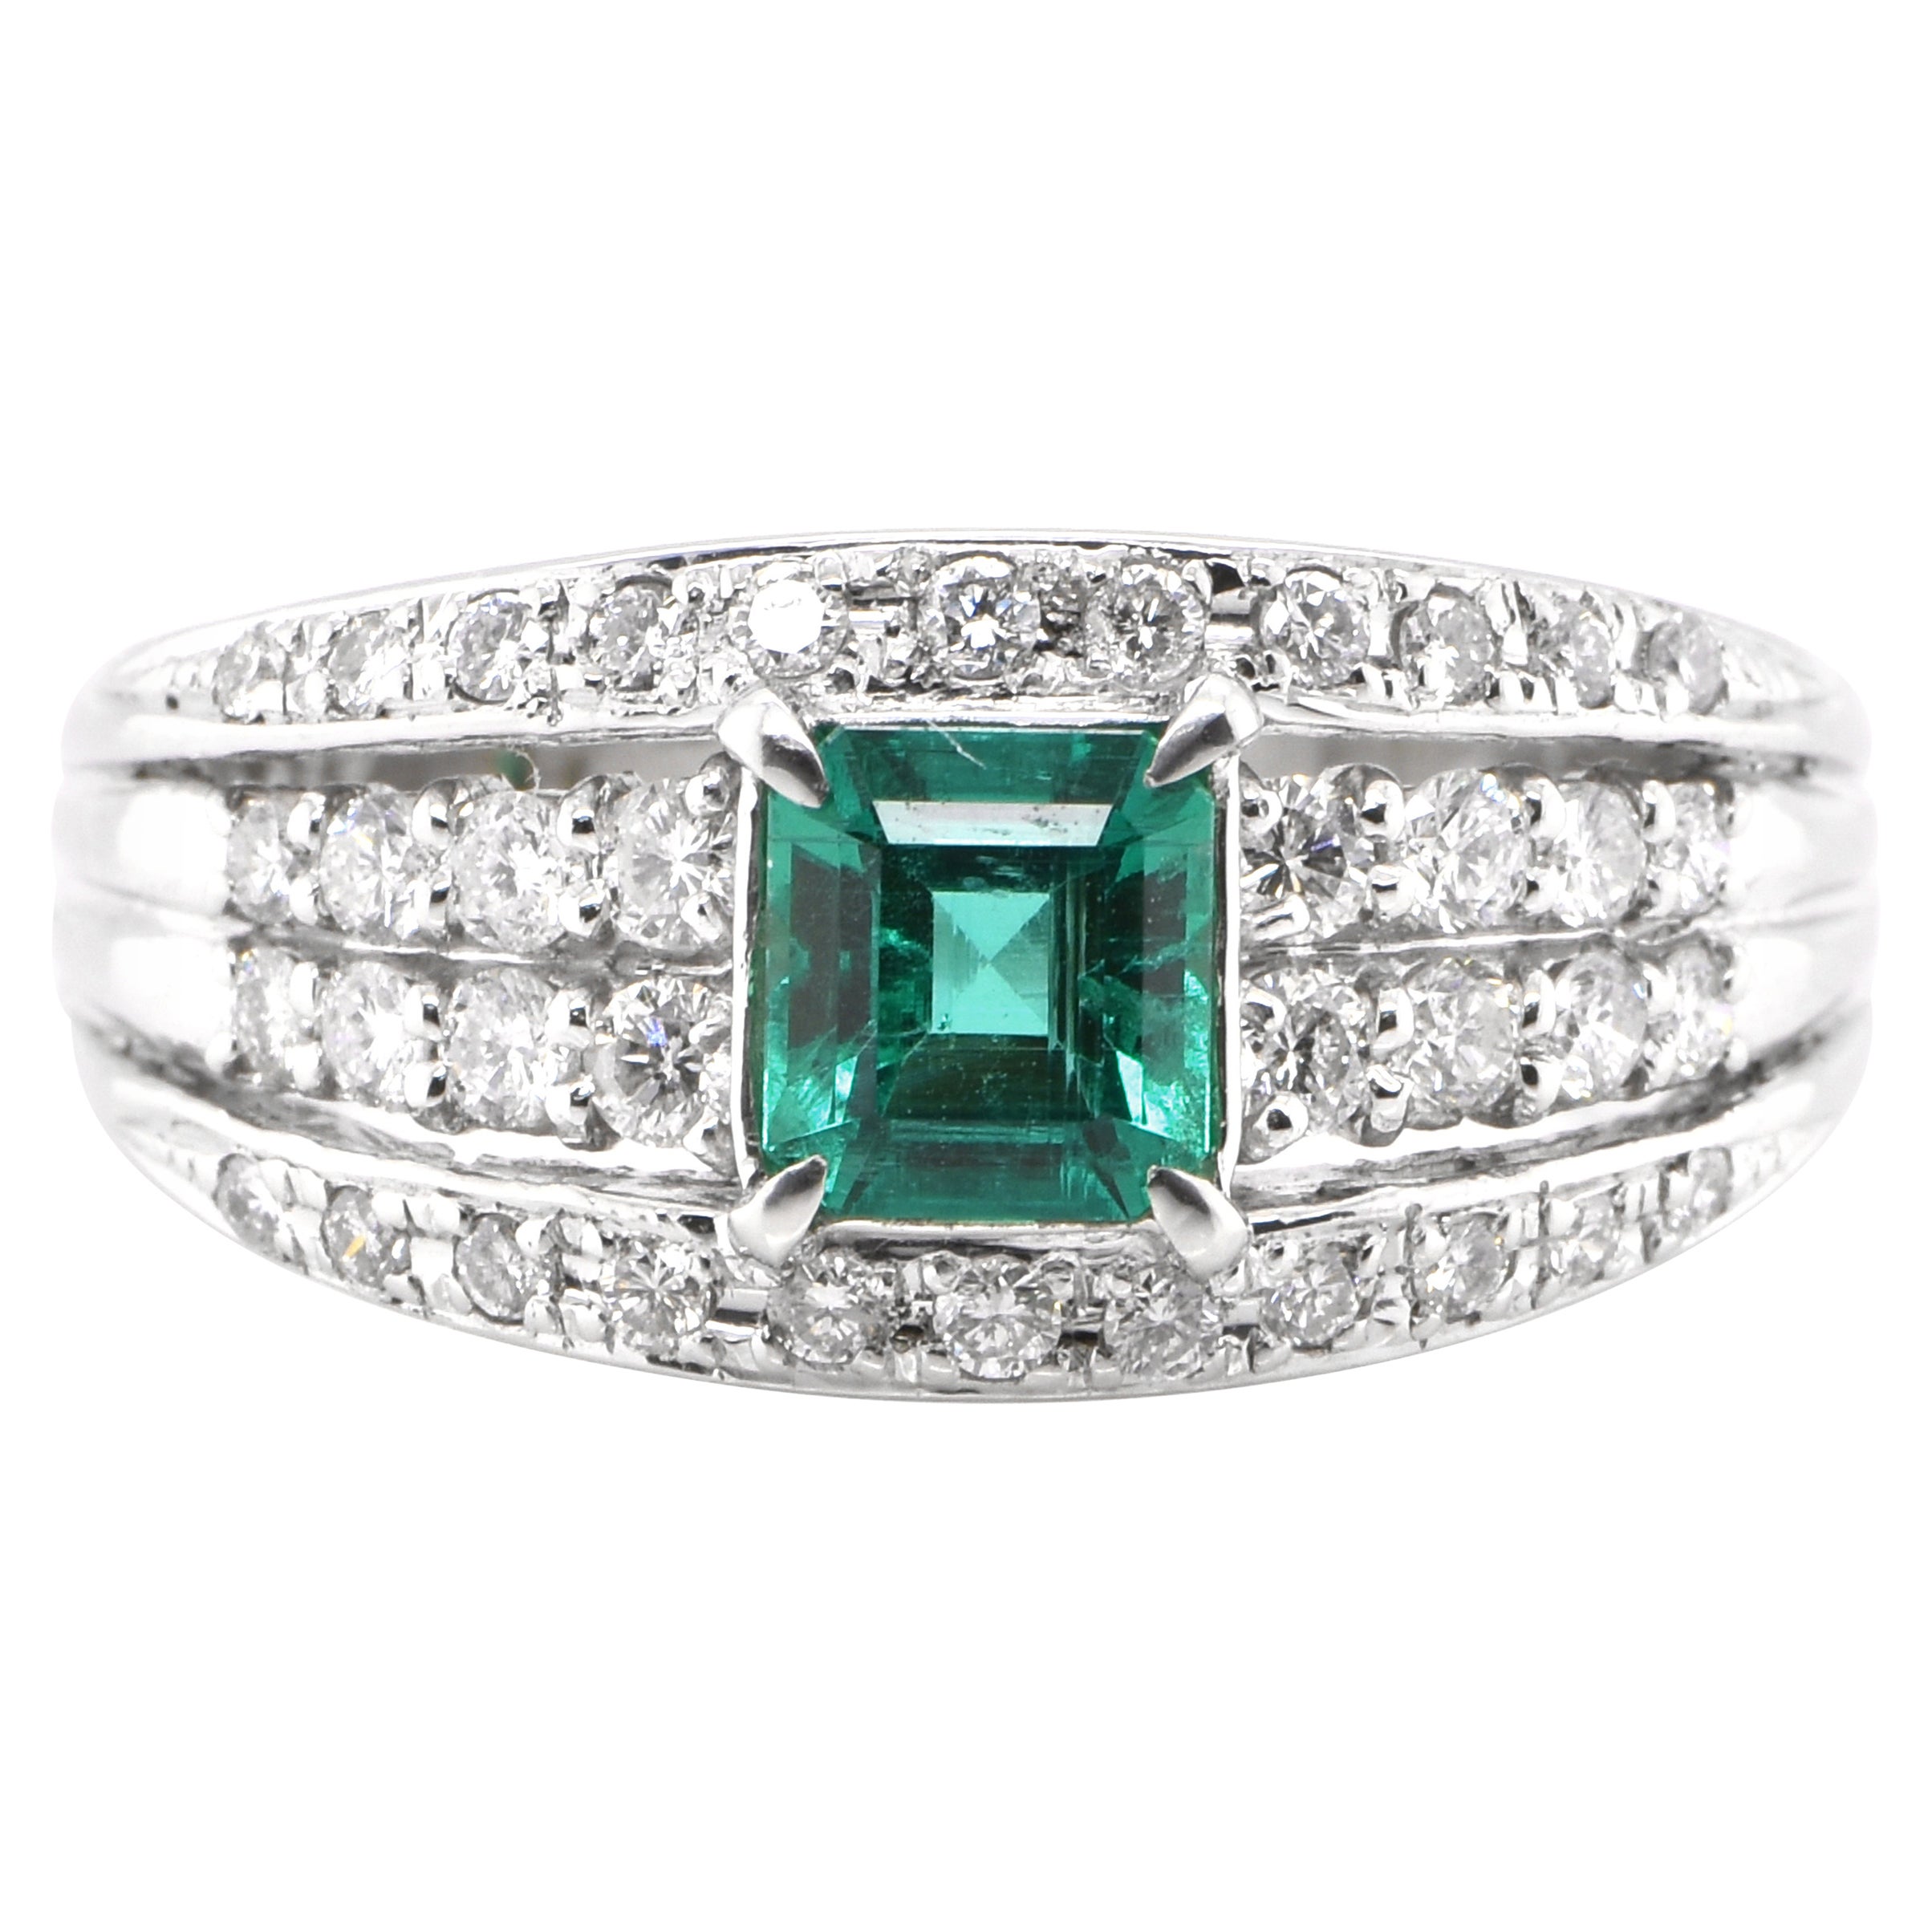 GIA Certified 0.76 Carat Natural Colombian No Oil Emerald Set in Platinum